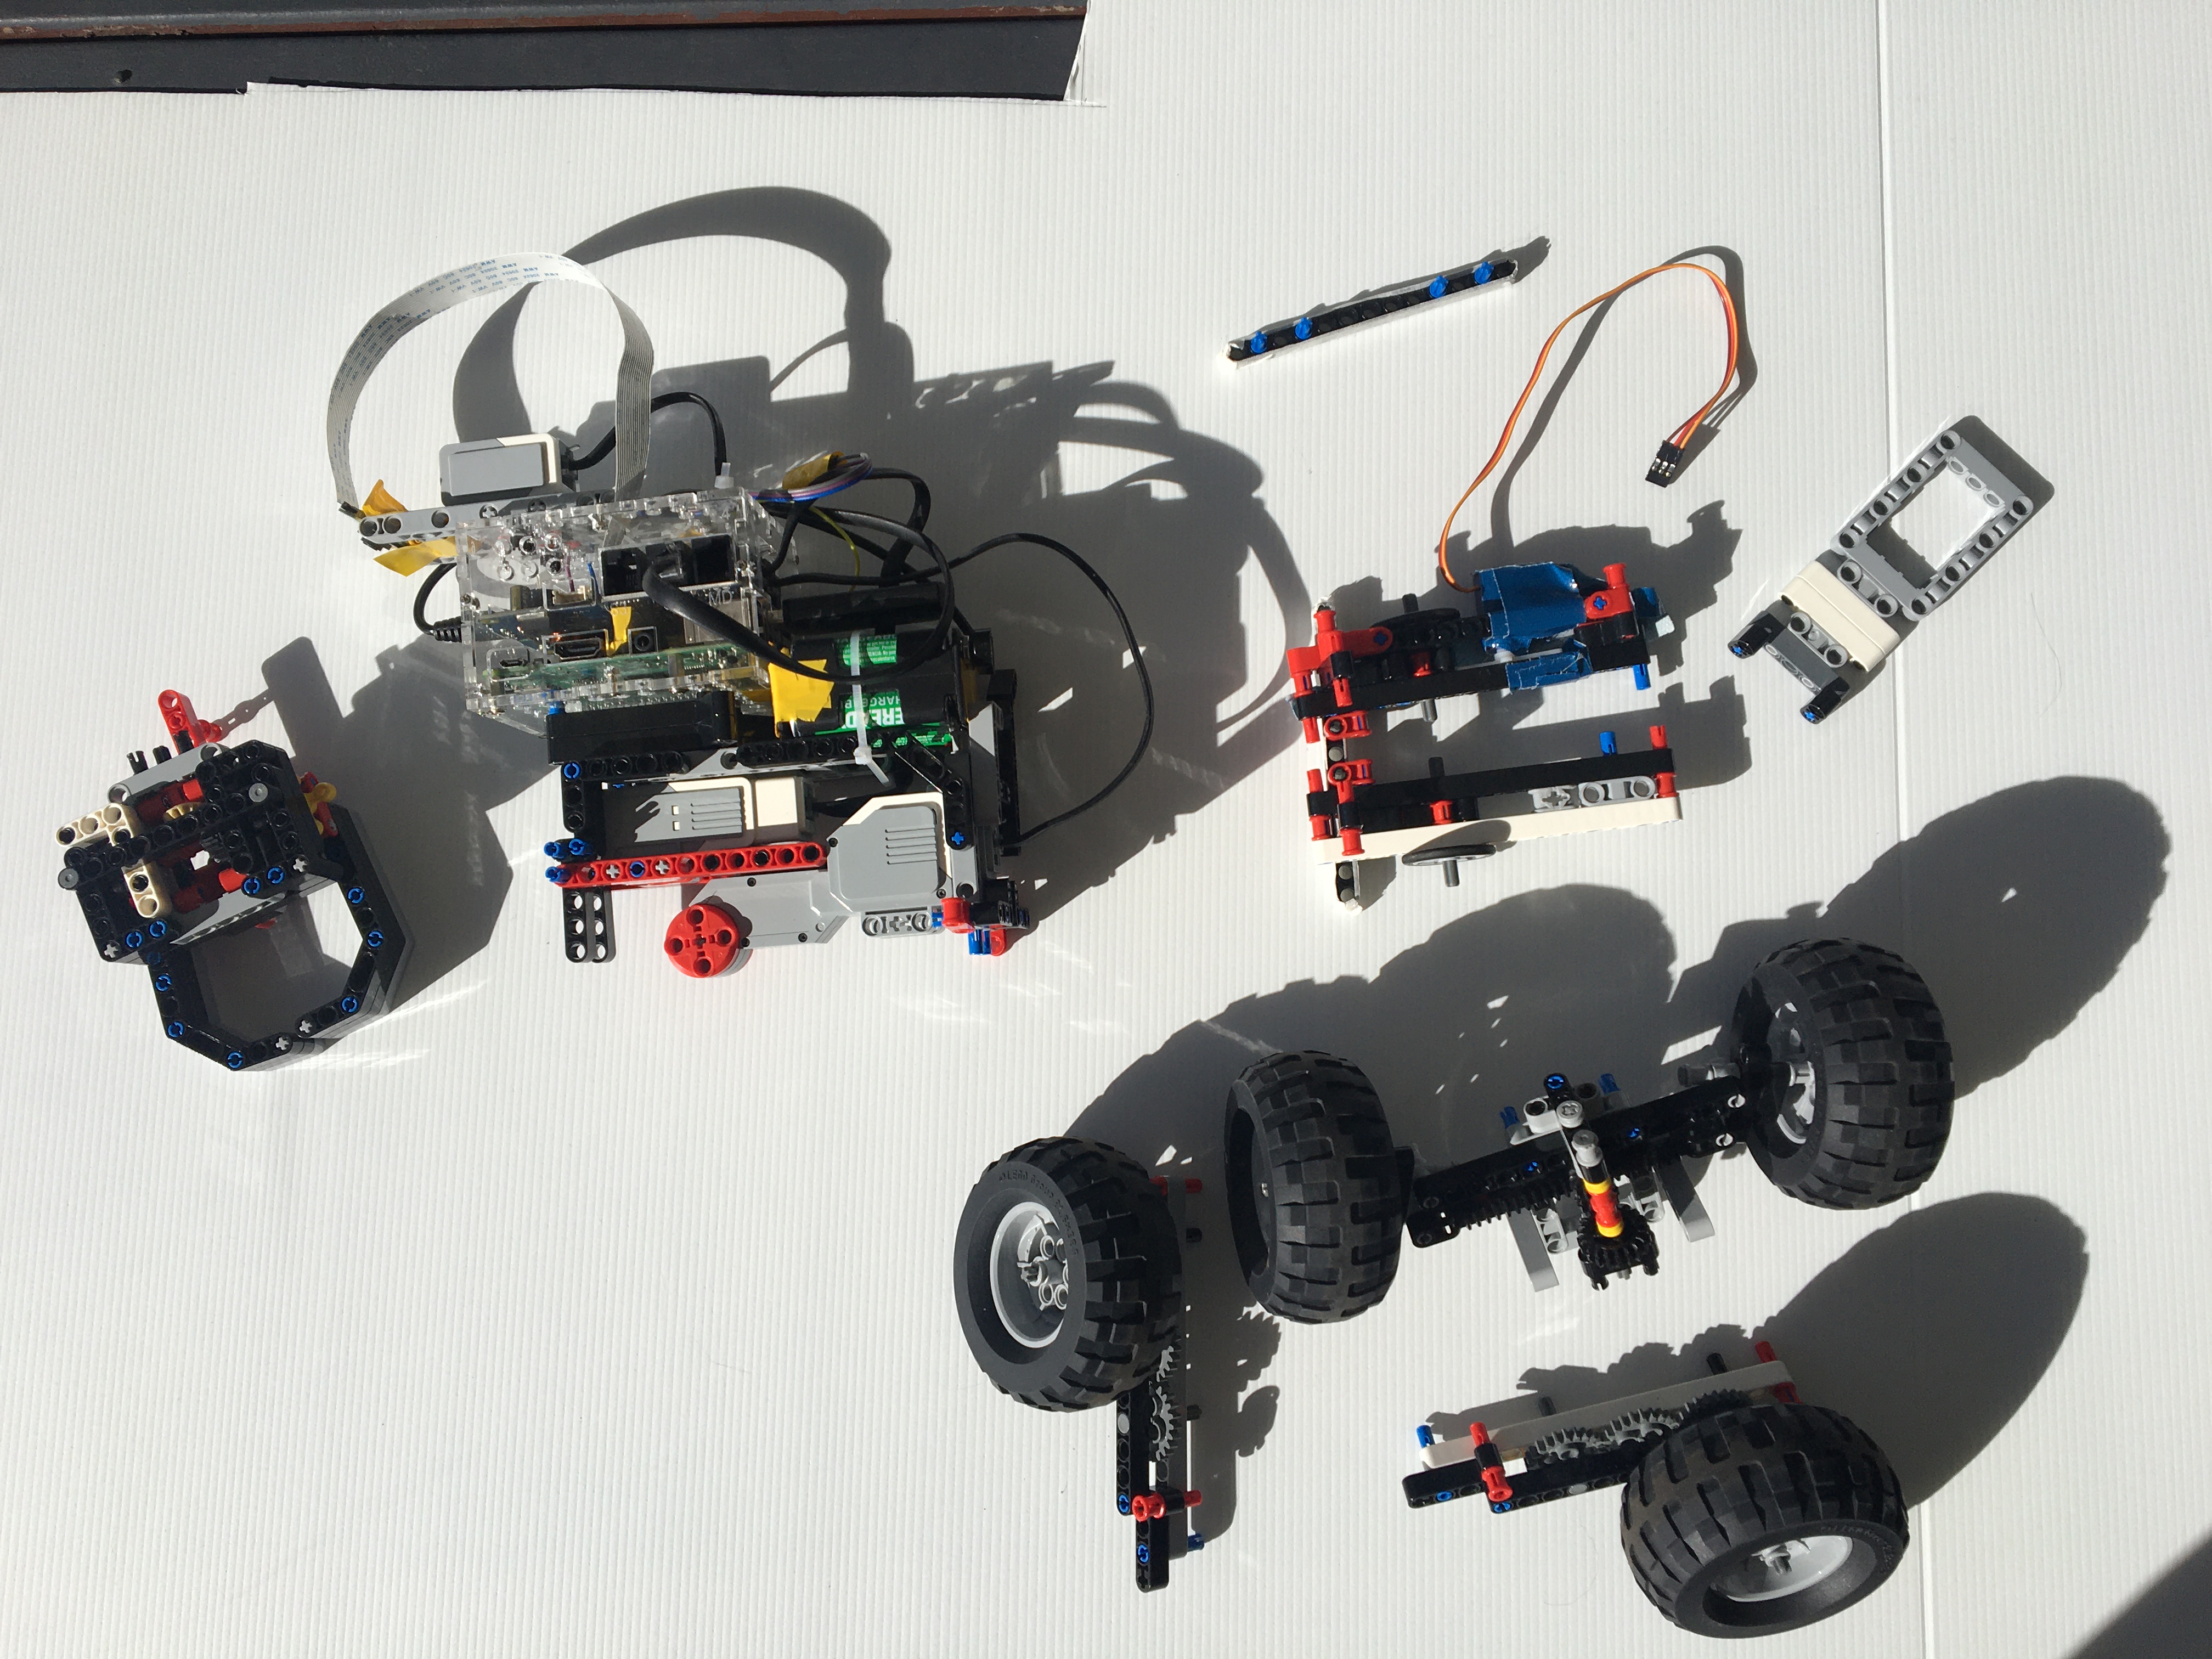 The claw, steering, pivot and plain ol' wheel attachments laid out on a white background.